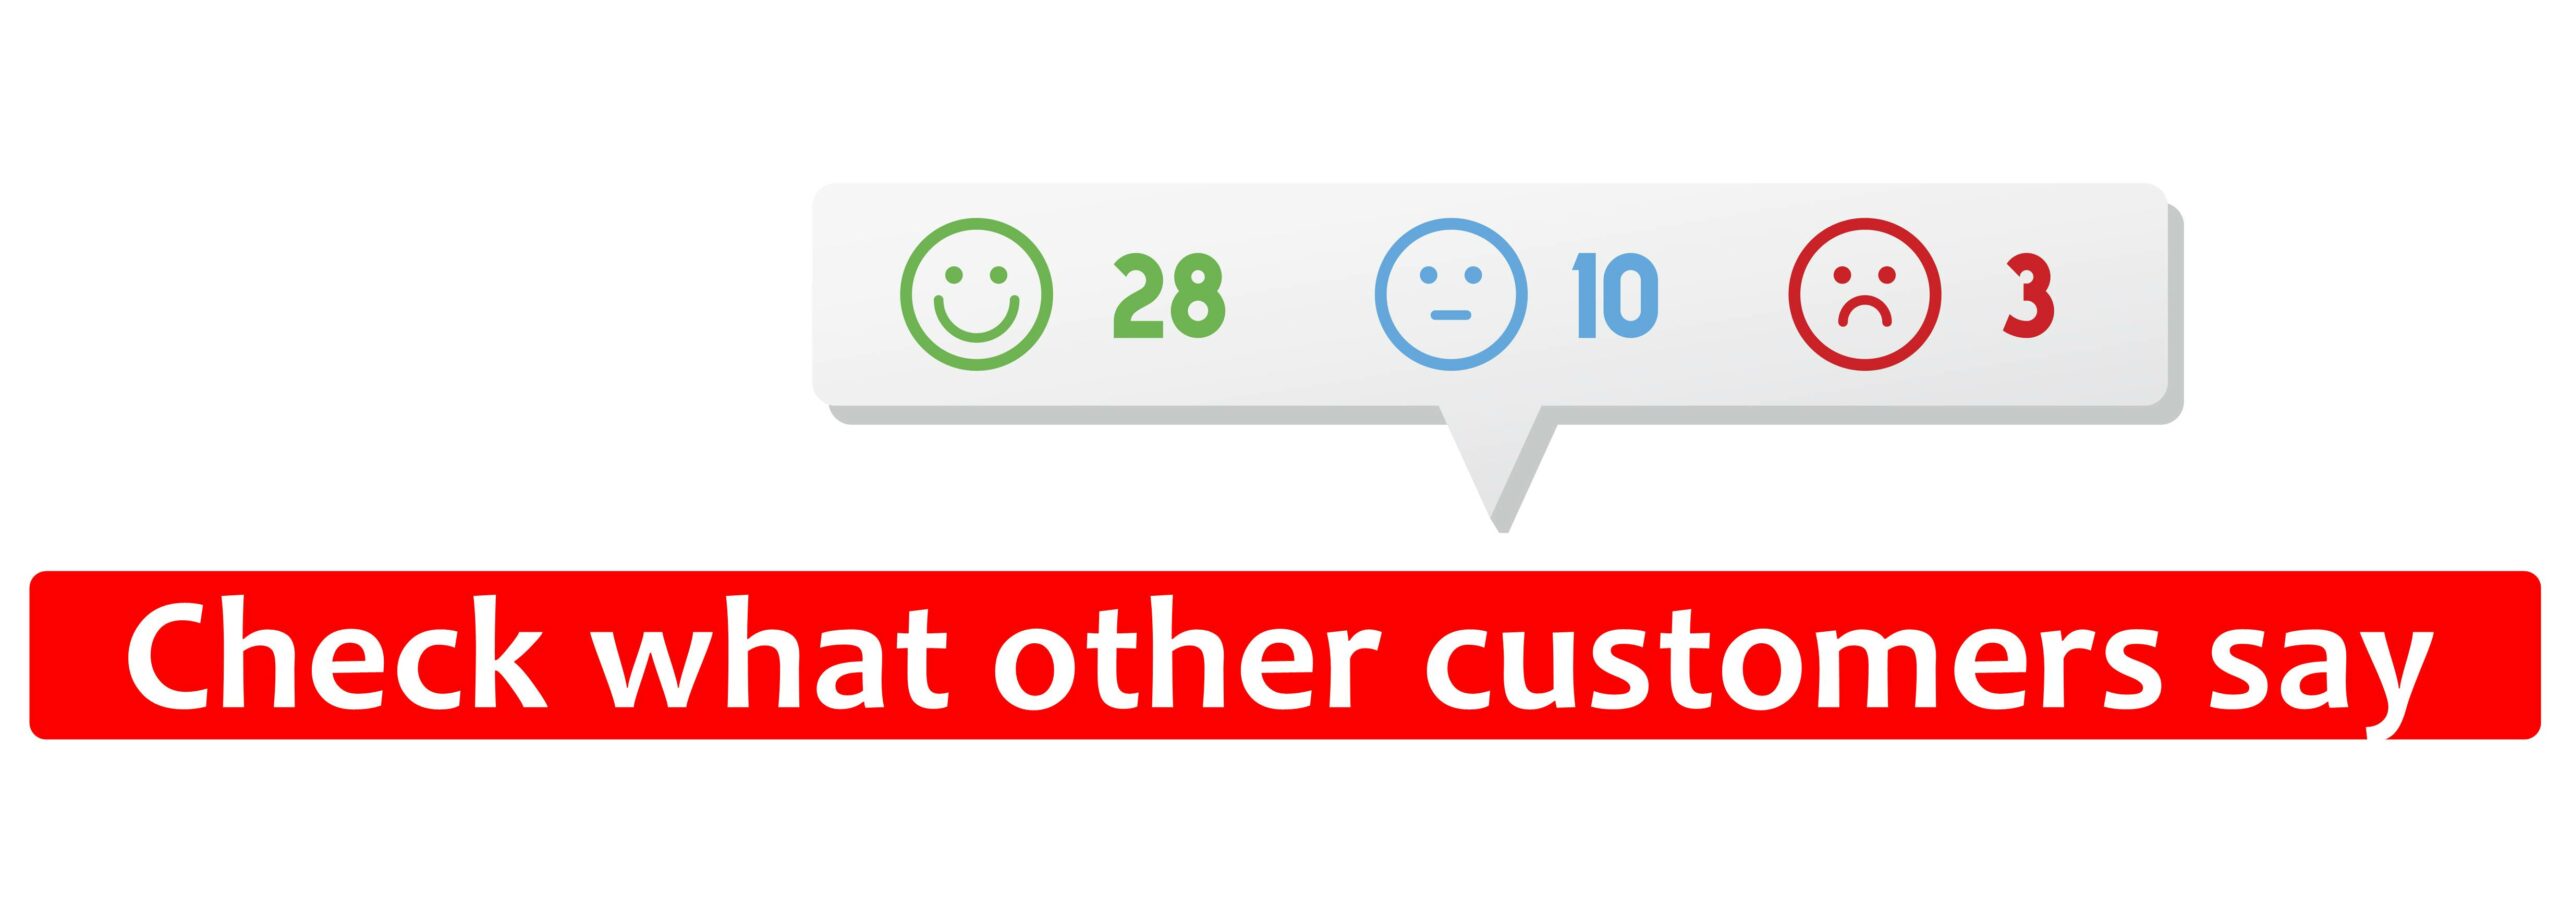 Check what other customers say